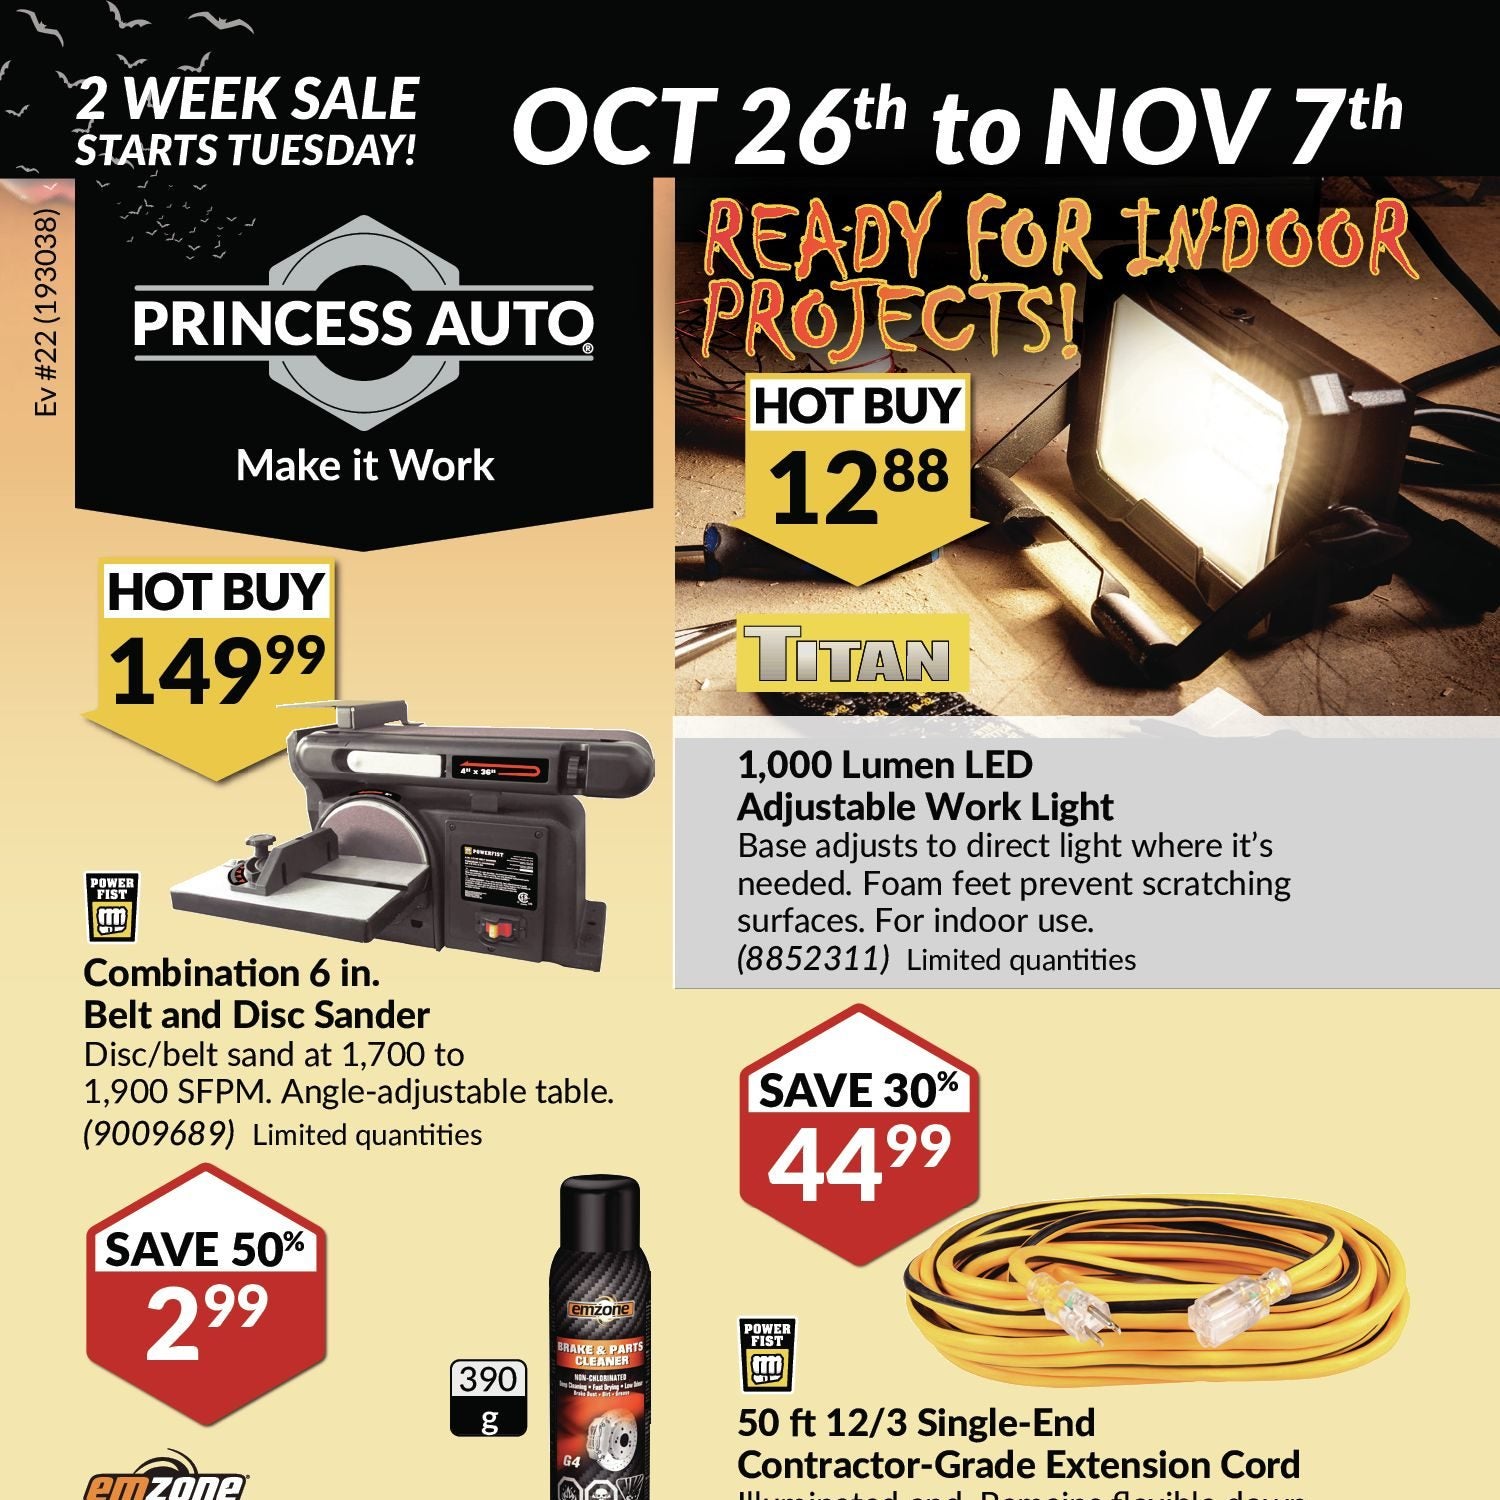 30 ft 12/3 3-Outlet Steel Retractable Extension Cord Reel, Princess Auto  deals this week, Princess Auto flyer